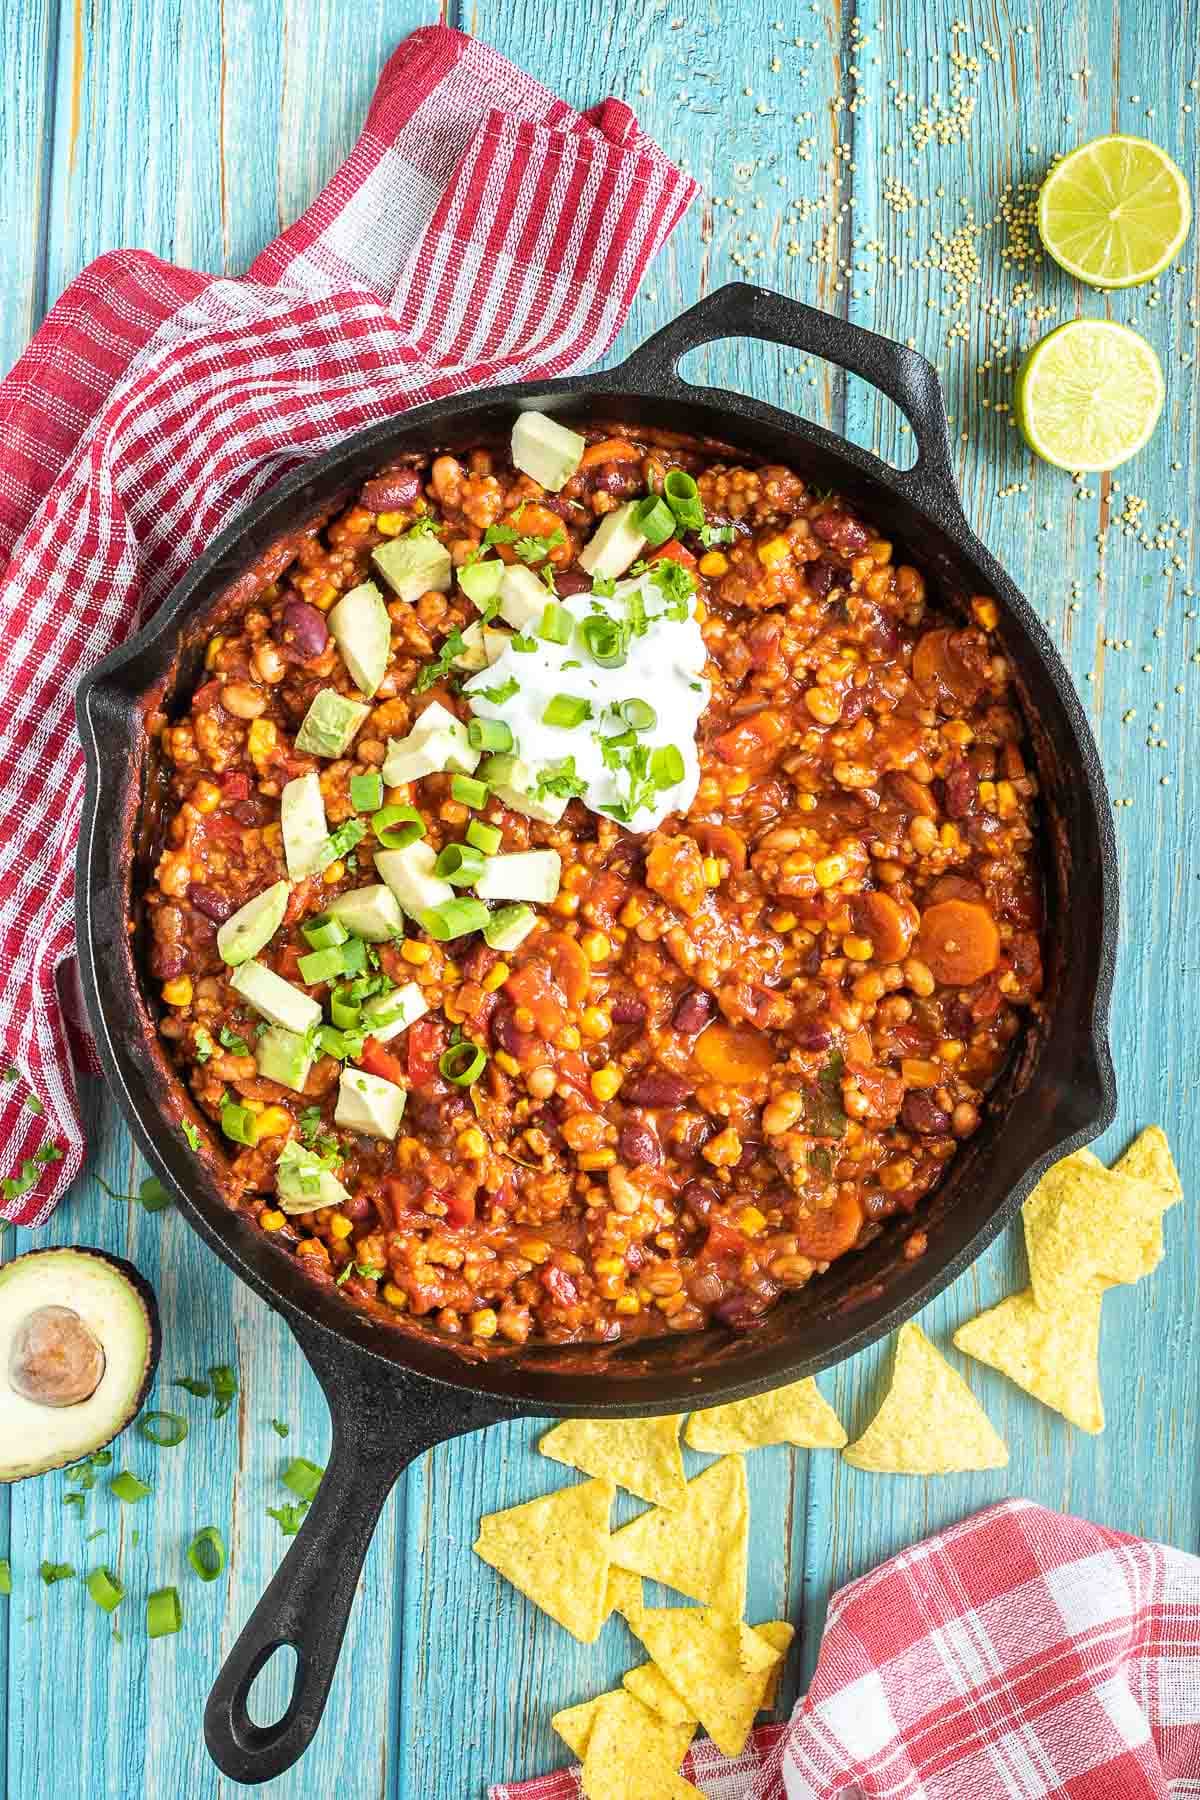 Cast iron skillet with a chunky chili loaded with chopped vegetables and beans, topped with white cream, chopped avocado, and scallion. Half avocados and tortilla chips are around it.